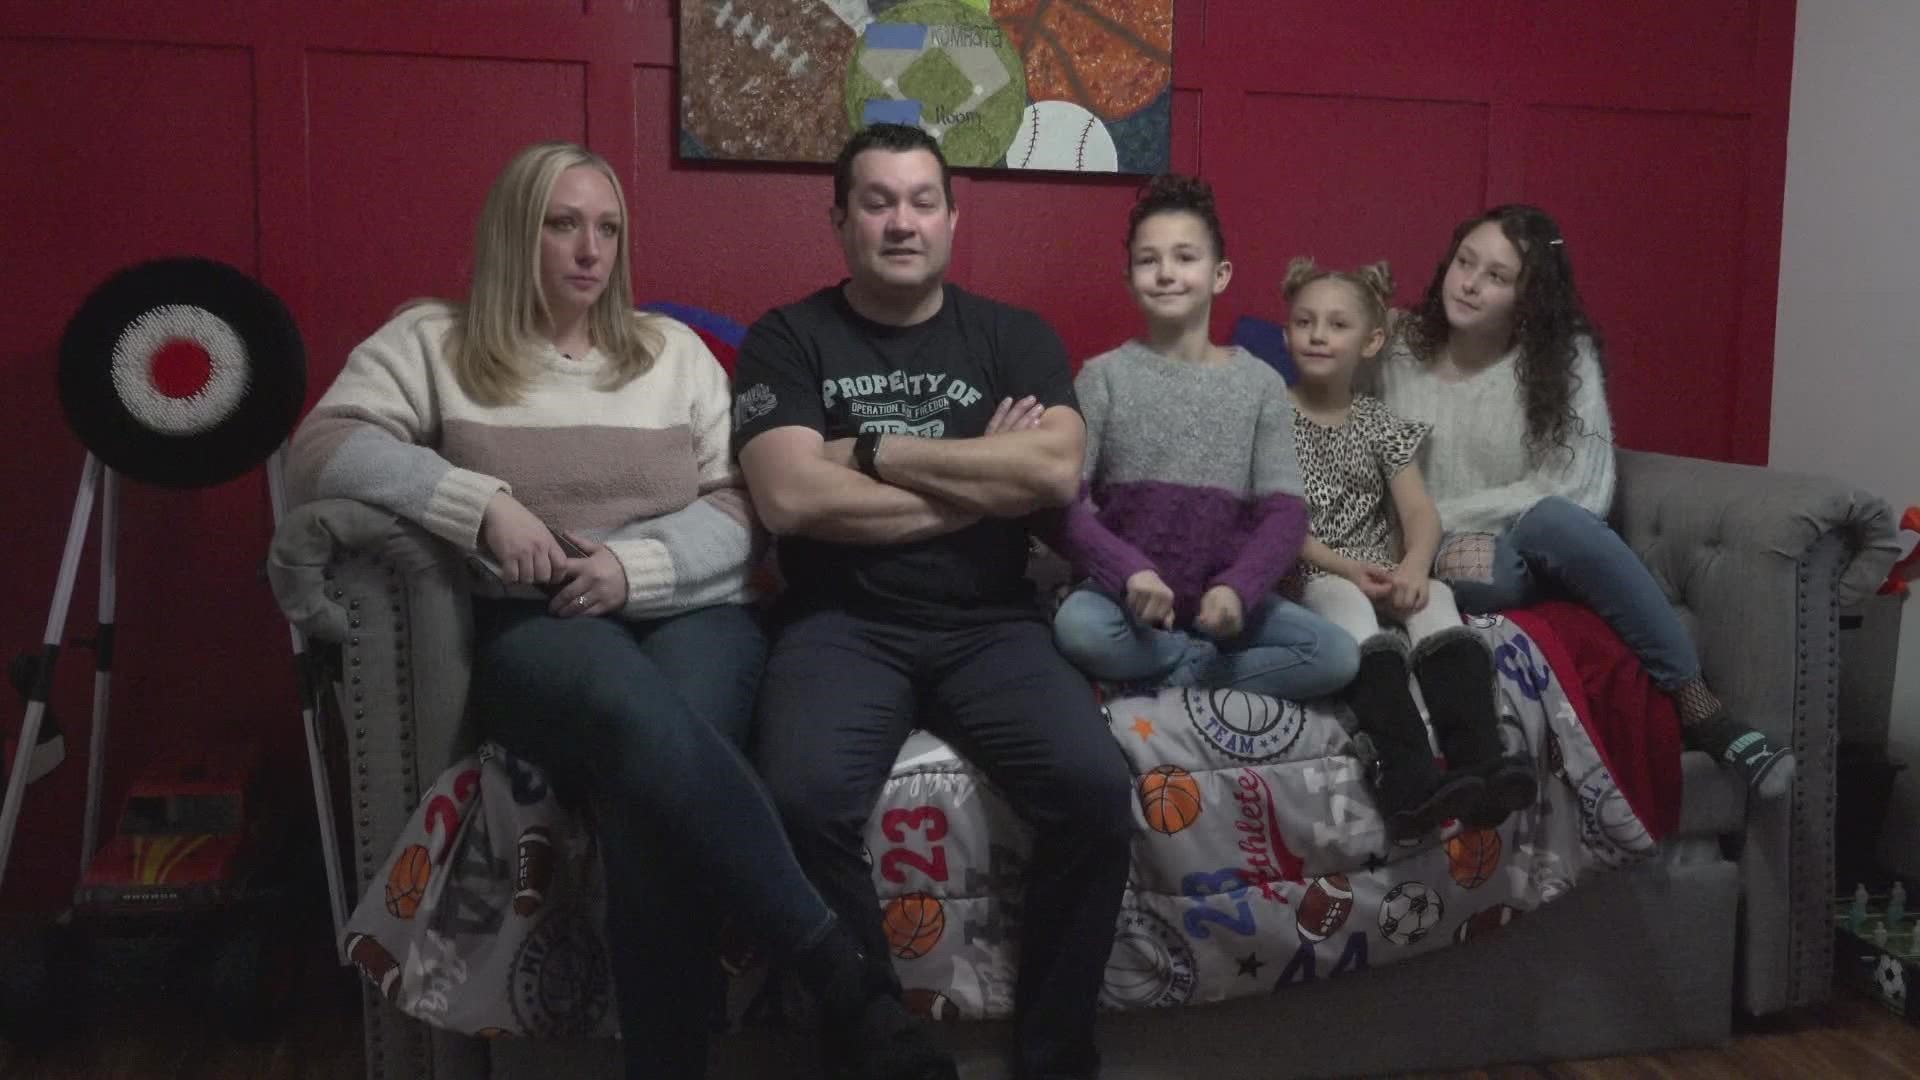 A western Washington family says they were in the process of adopting a boy from Ukraine- but now he is stranded, with food at his orphanage running out.